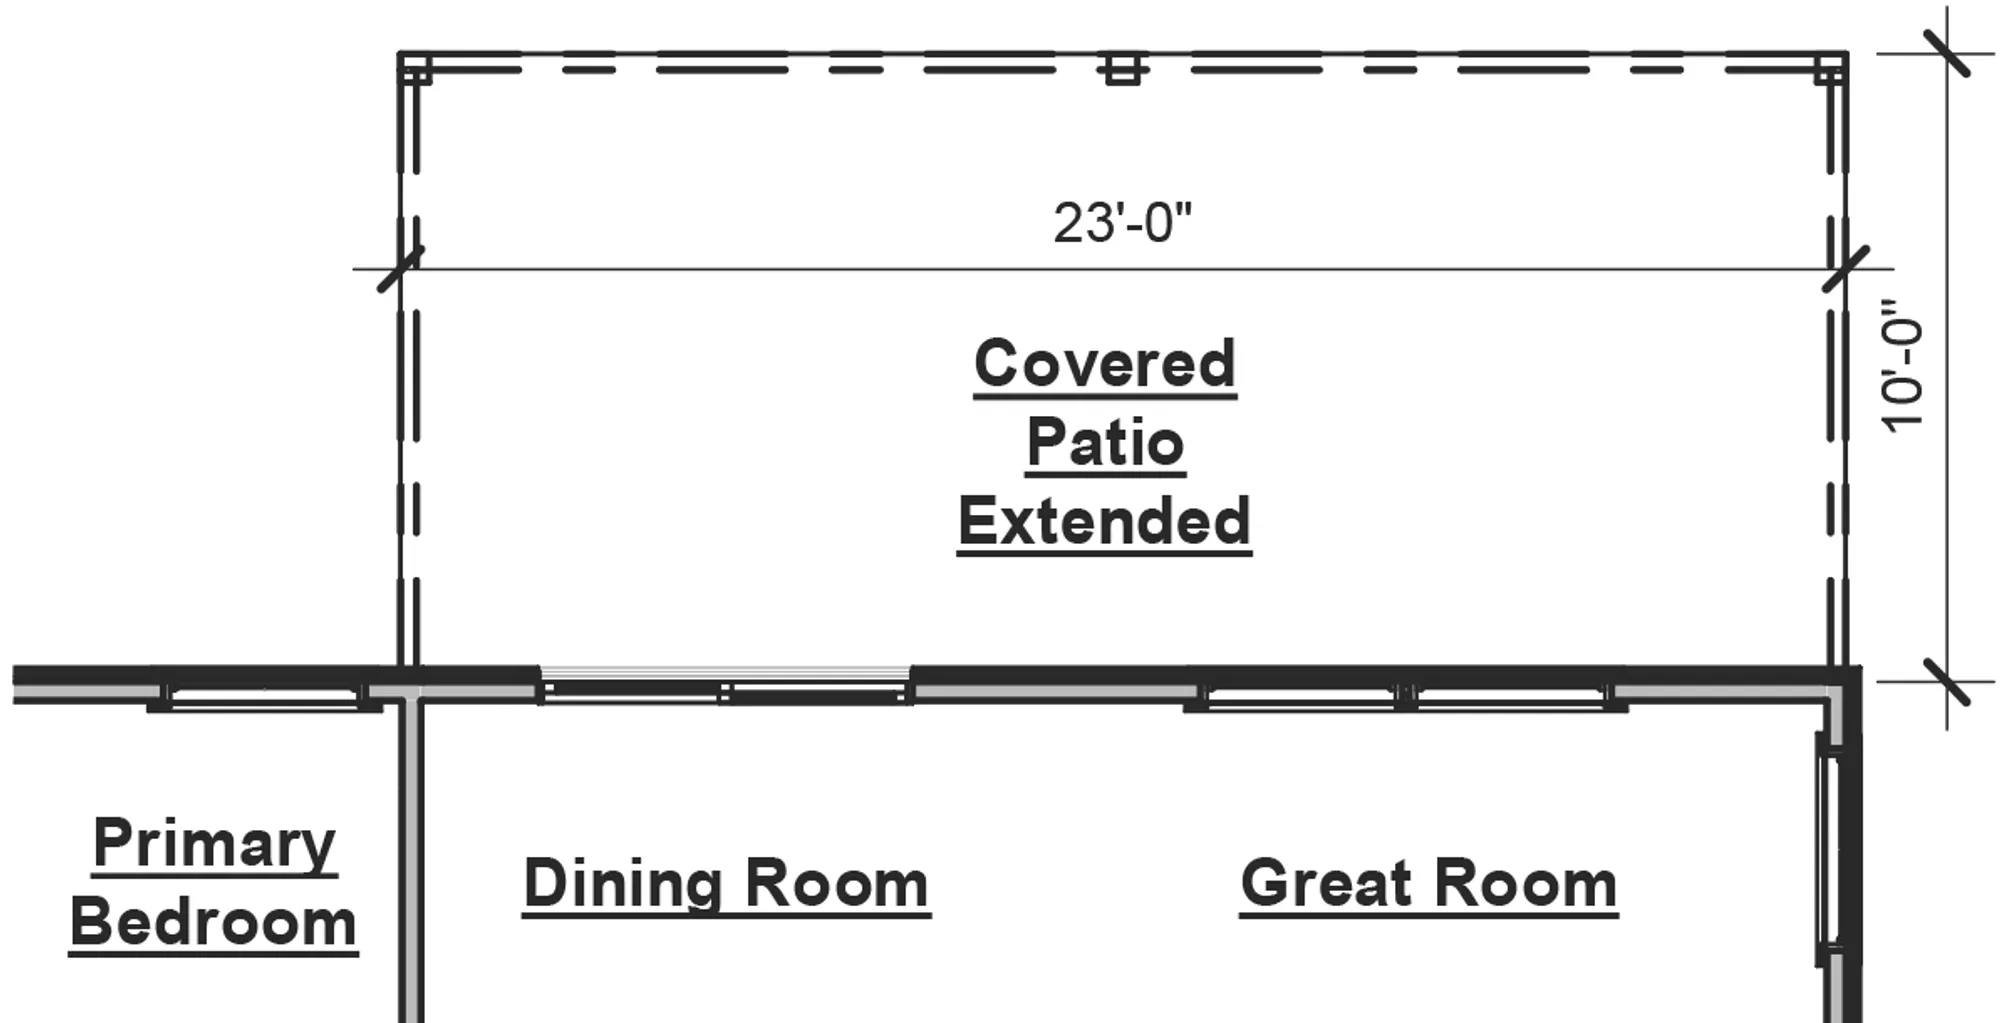 Extended Covered Patio - undefined